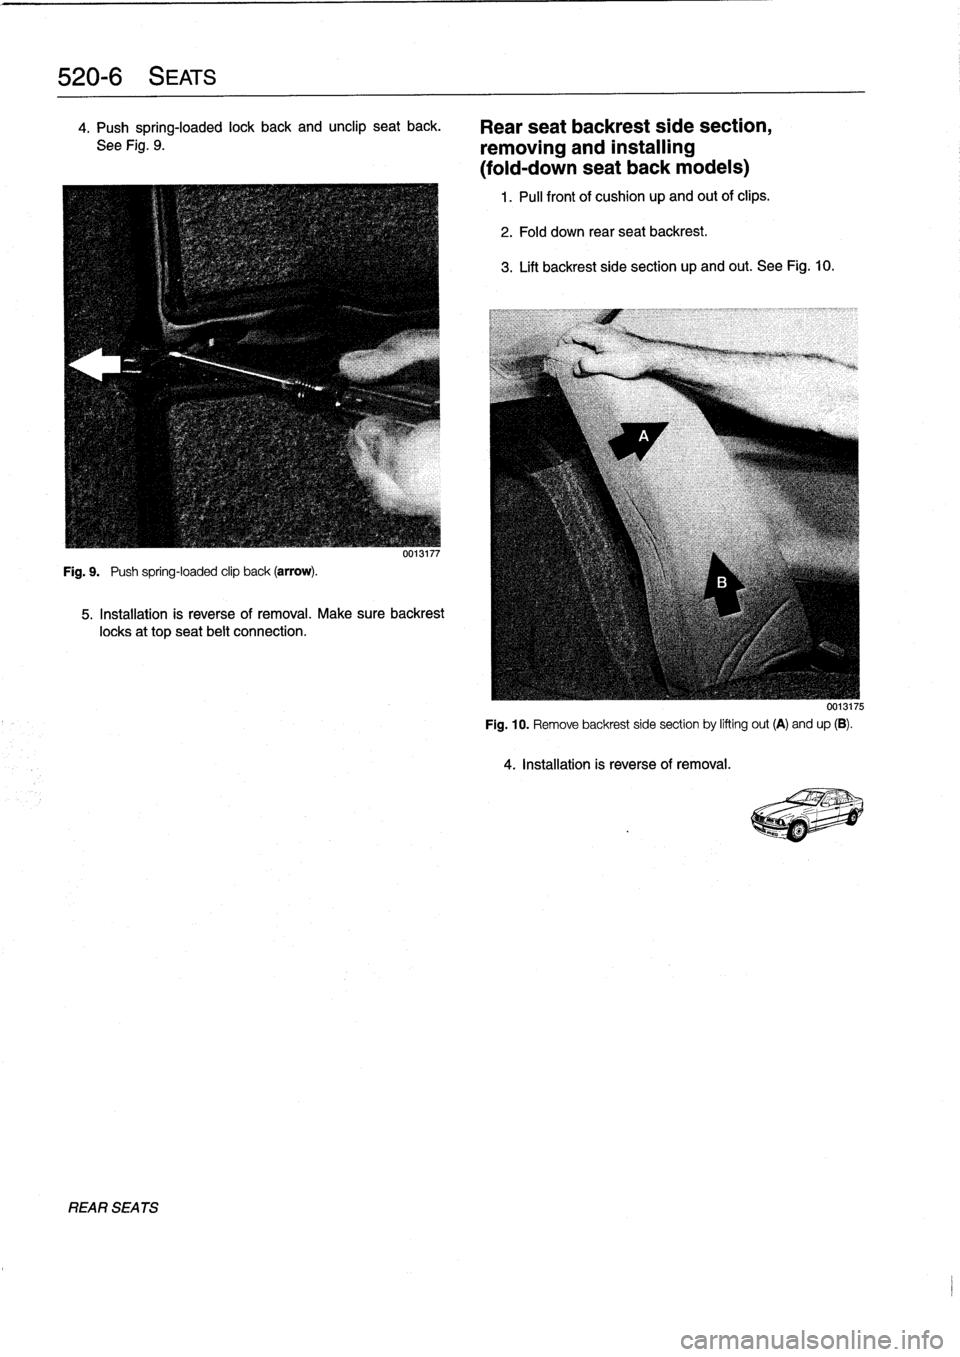 BMW 328i 1994 E36 Workshop Manual 
520-
6
SEATS

4
.
Push
spring-loaded
lock
back
and
unclip
seat
back
.

See
Fig
.
9
.

Fig
.
9
.

	

Push
spring-loaded
clip
back
(arrow)
.

UU13117

5
.
Installation
is
reverse
of
removal
.
Make
sure